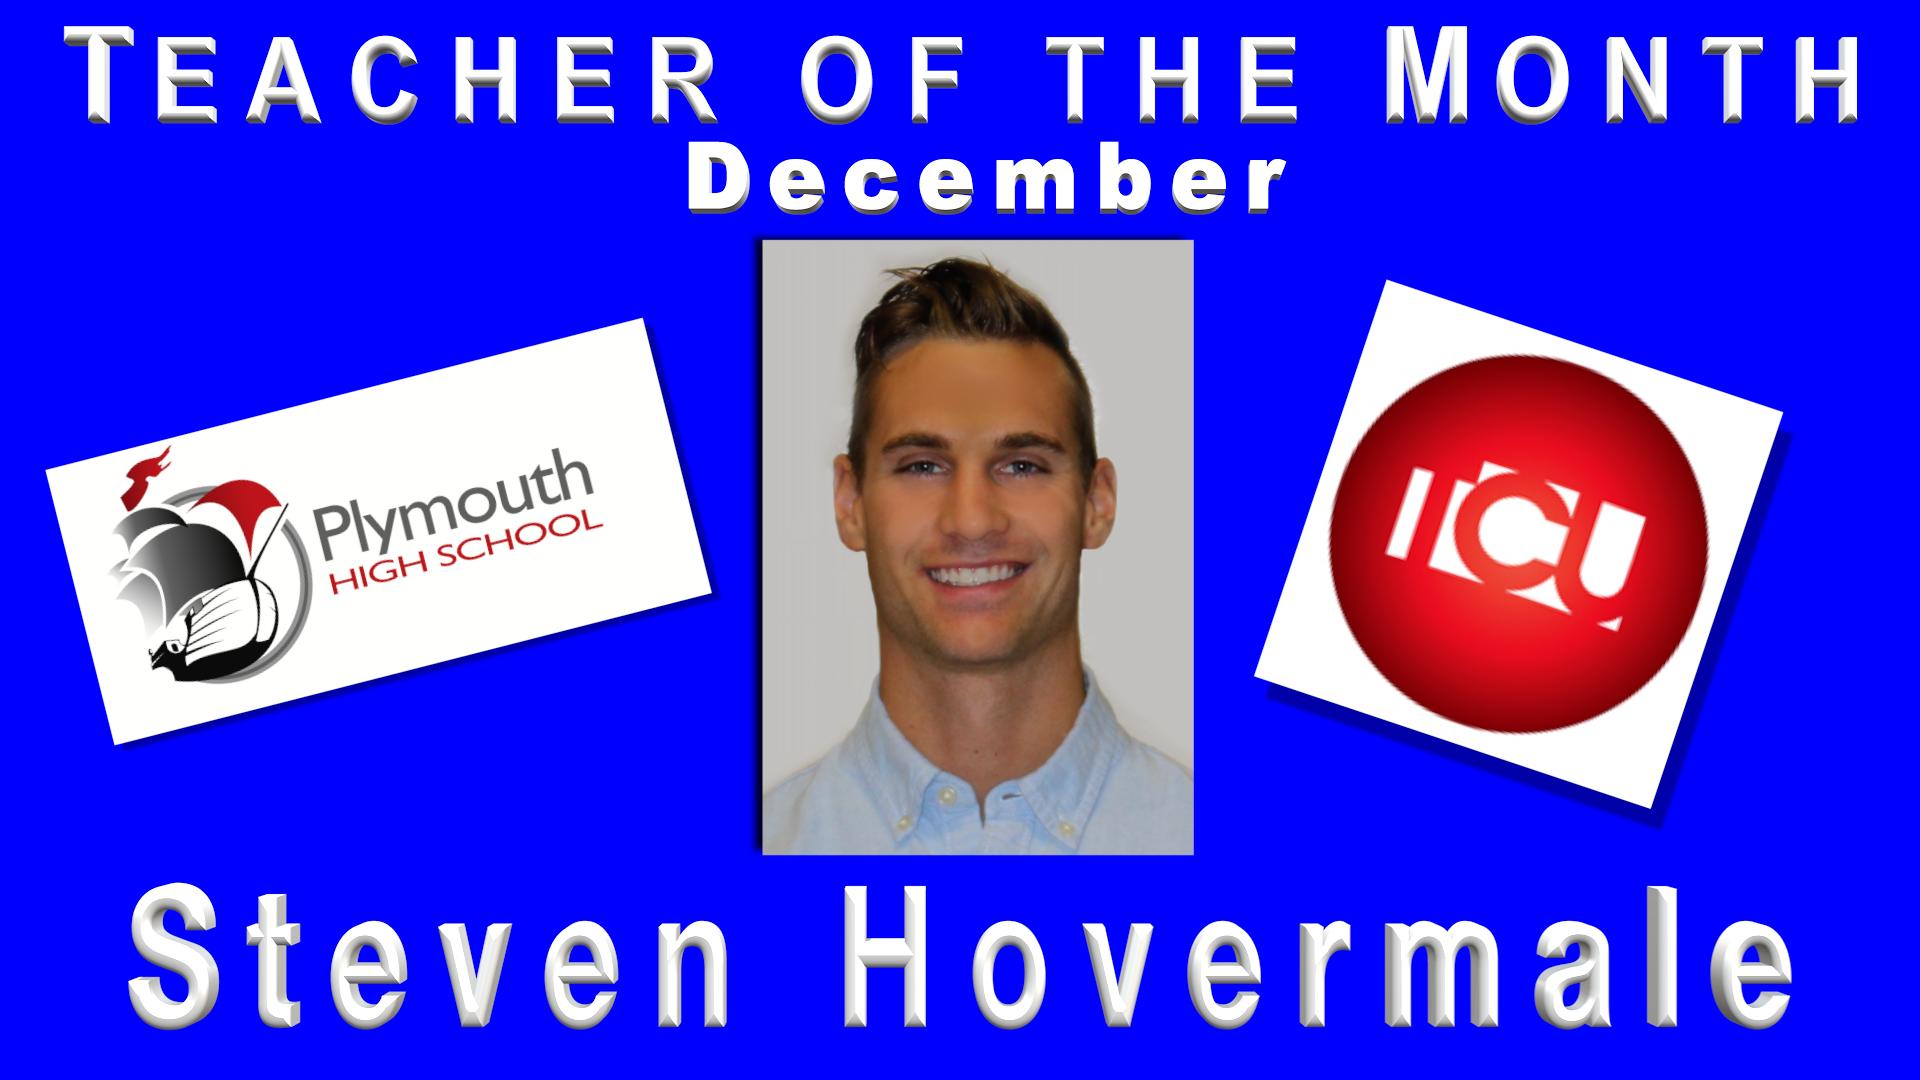 Teacher of the Month December Steven Hovermale. Plymouth High School and TCU logos